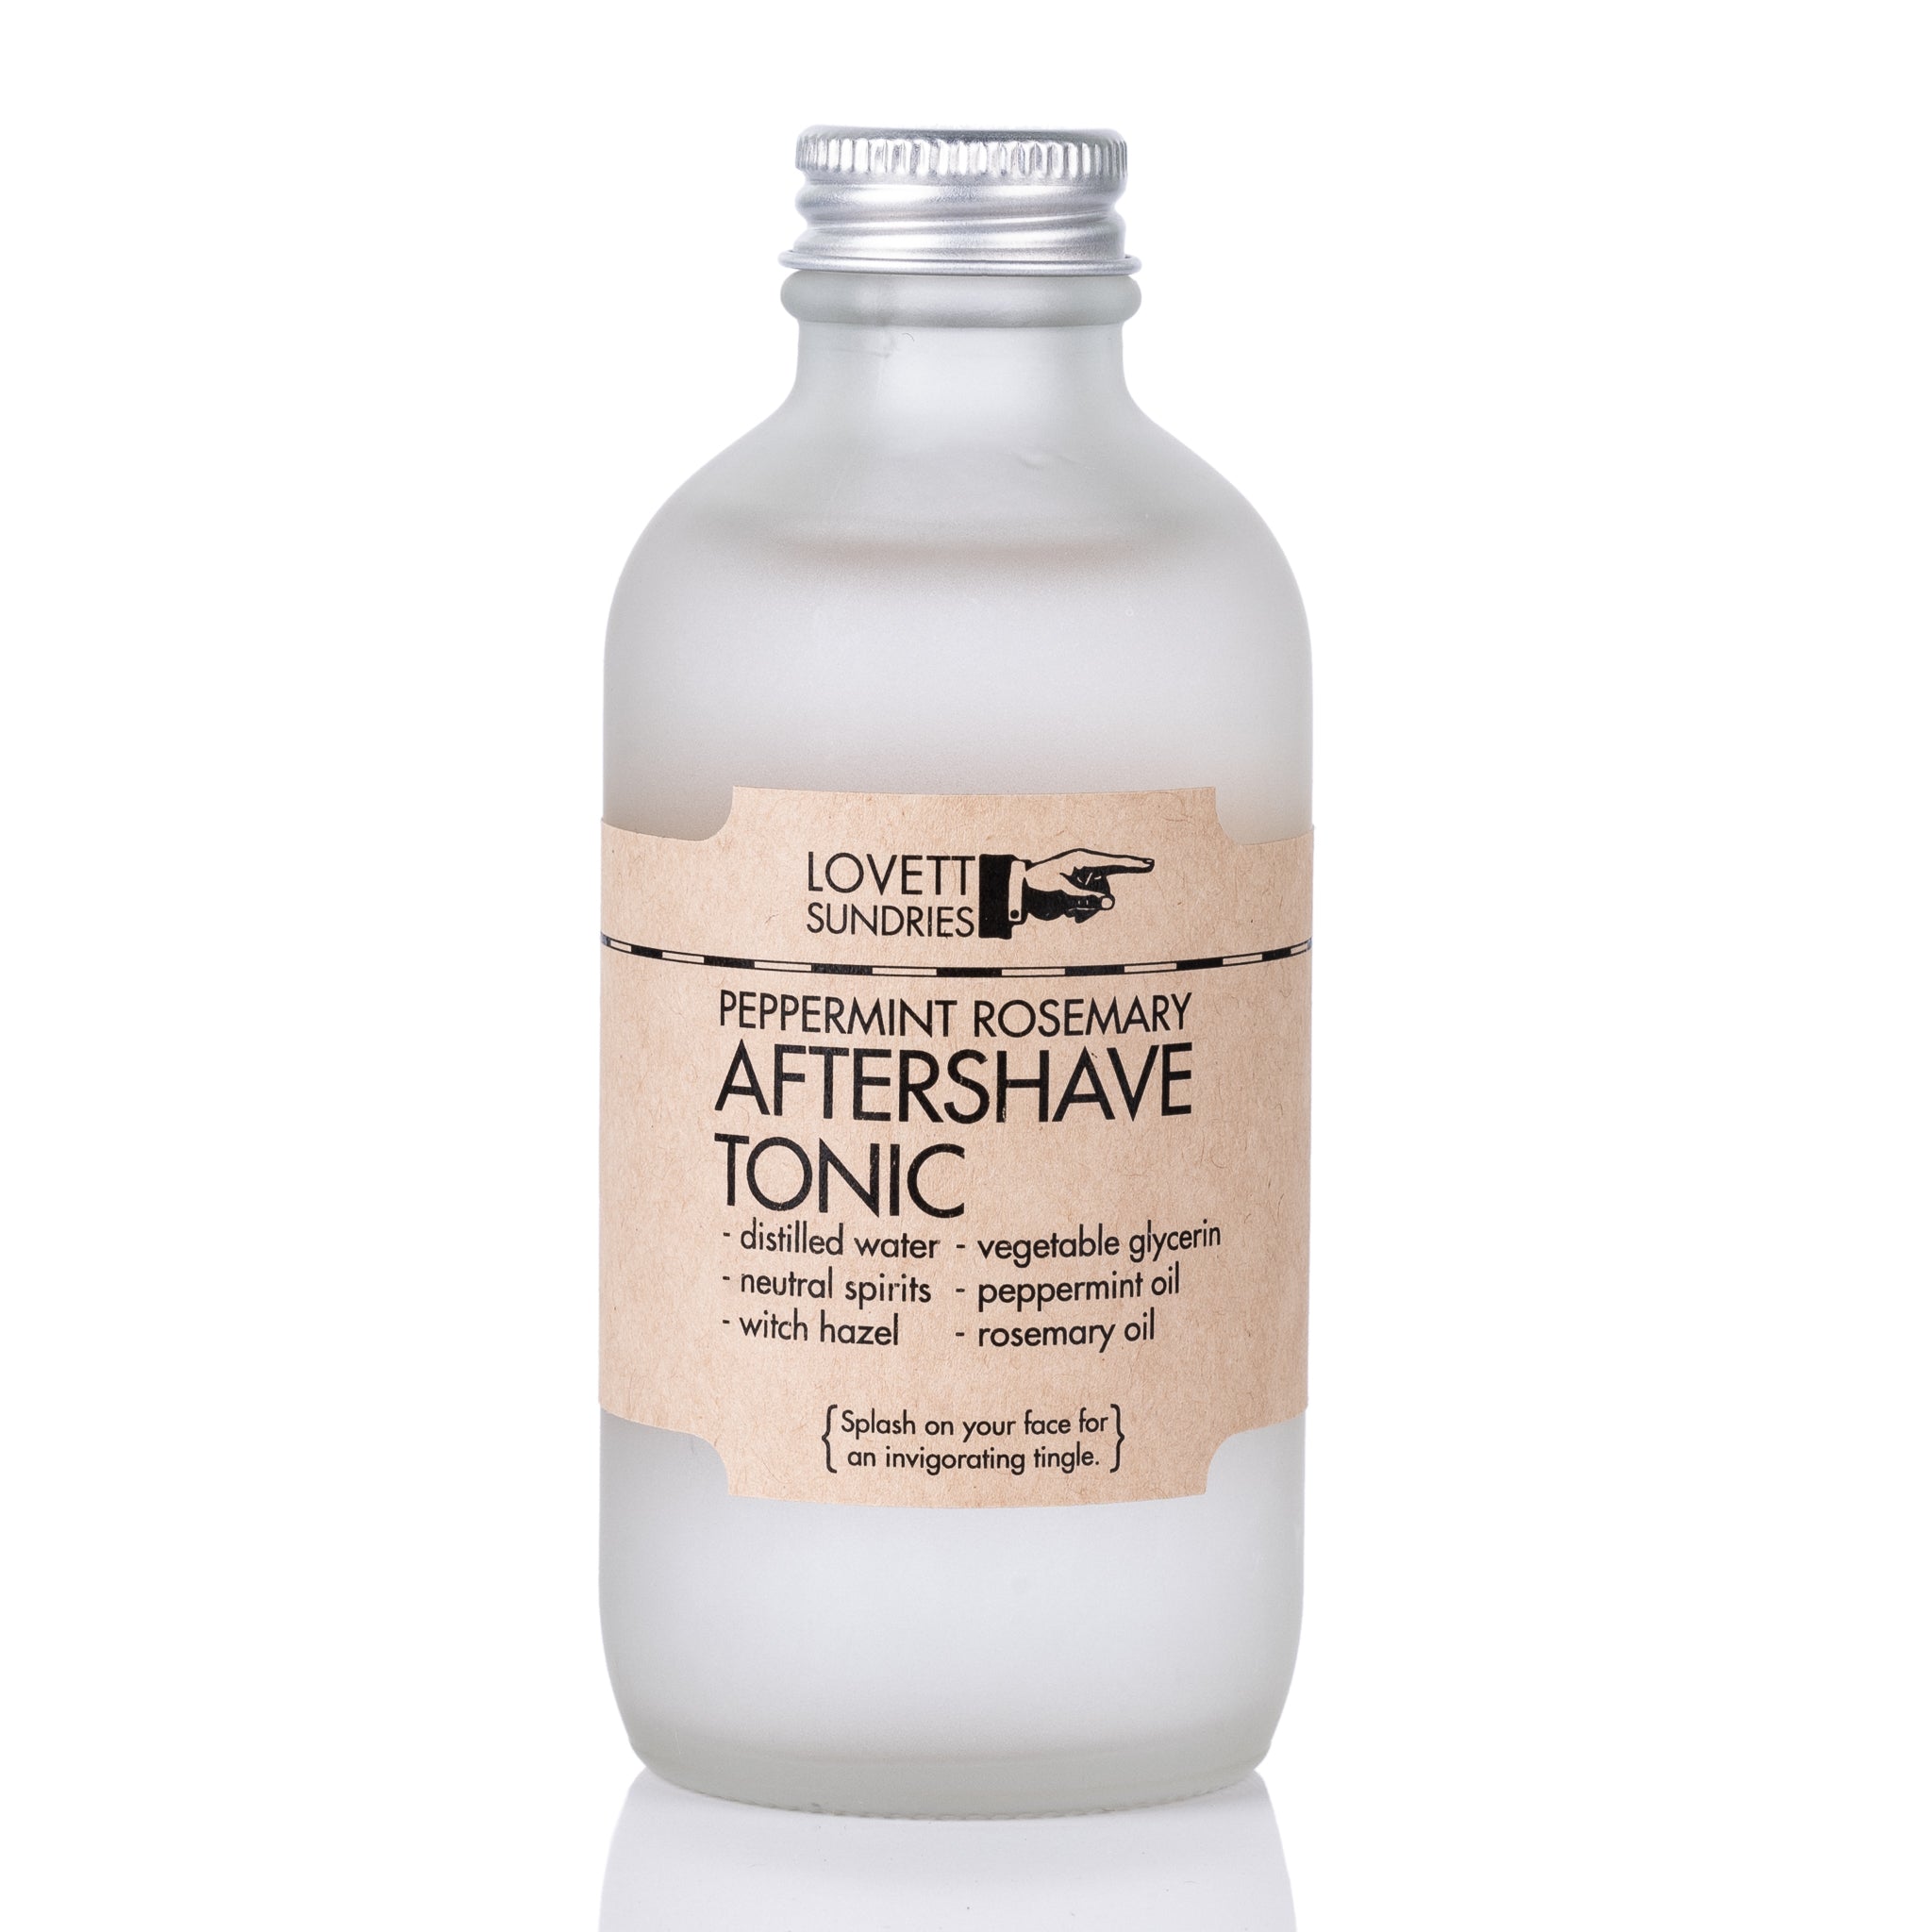 A bottle of aftershave tonic